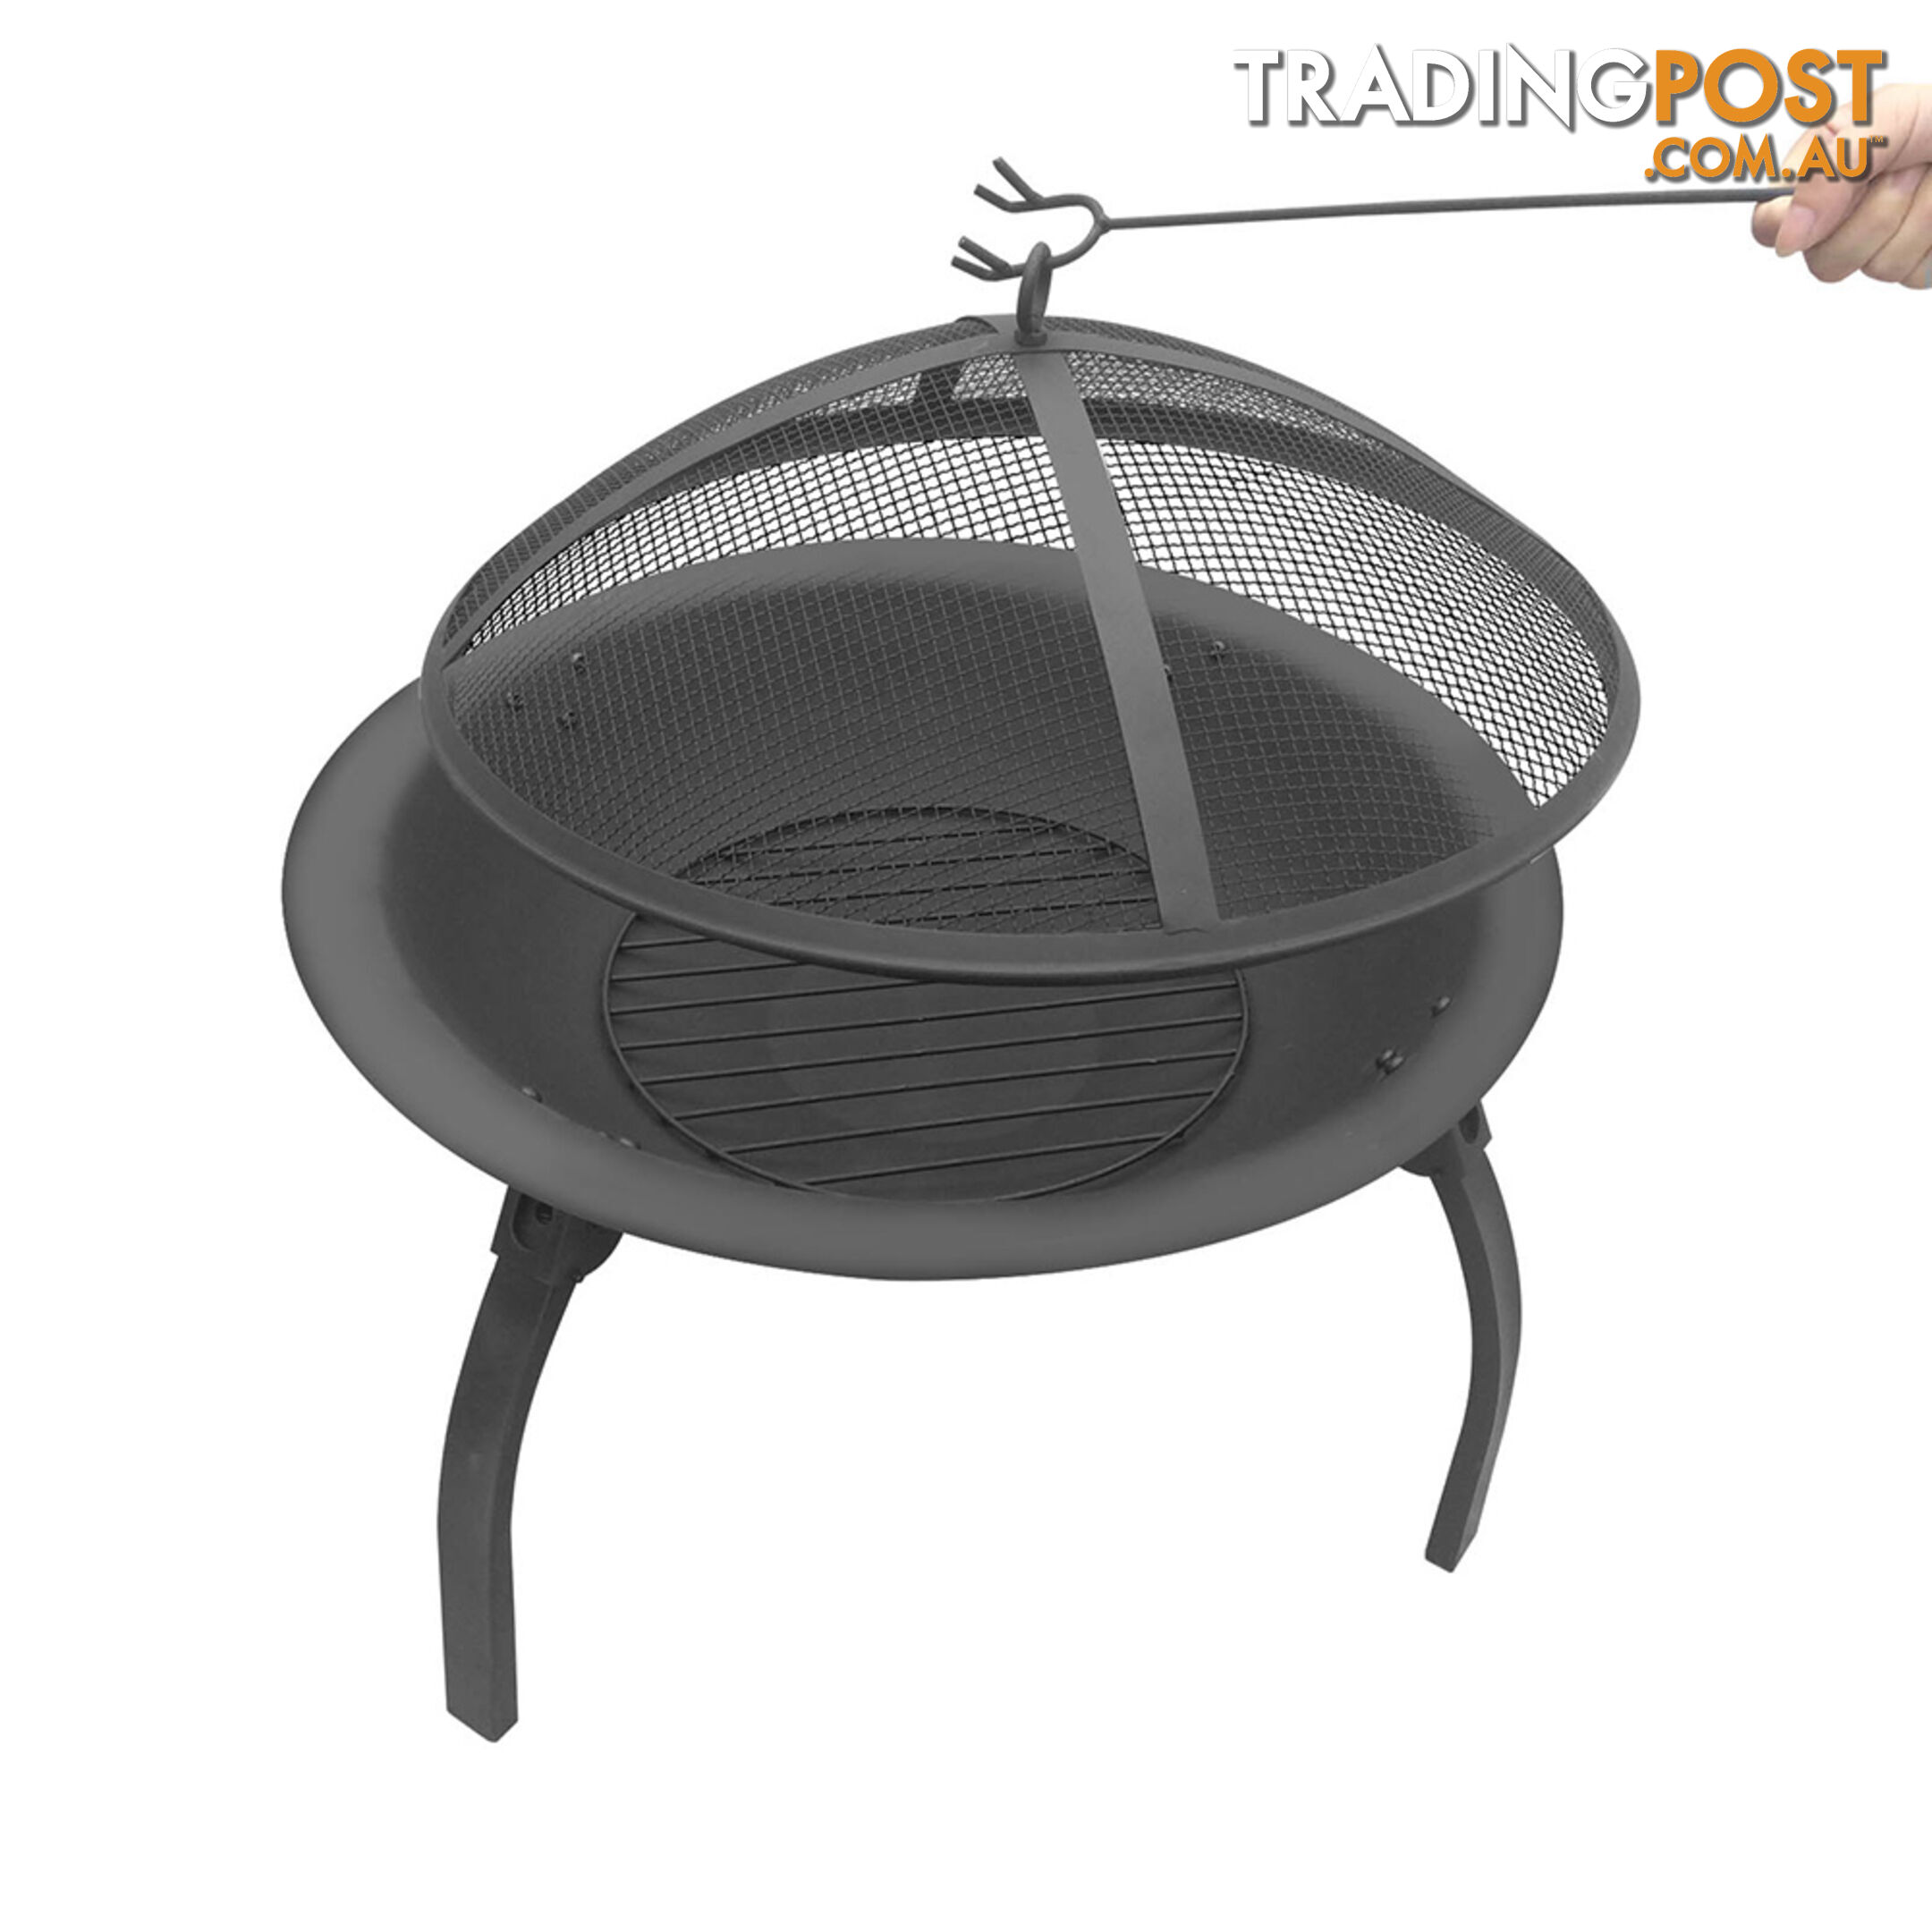 30 Inch Outdoor Garden Camping Portable Foldable Fire Pit BBQ Fireplace